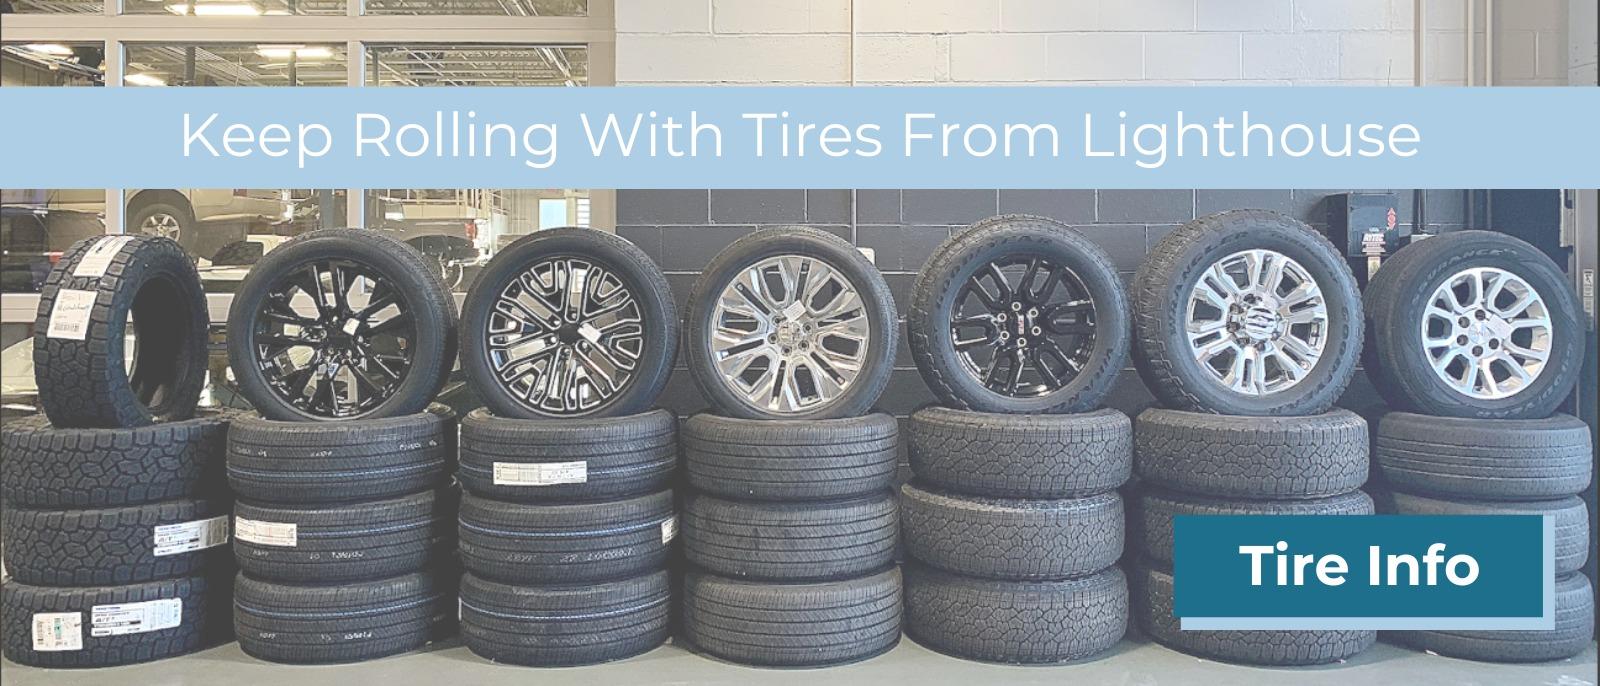 Keep rolling with tires at Lighthouse